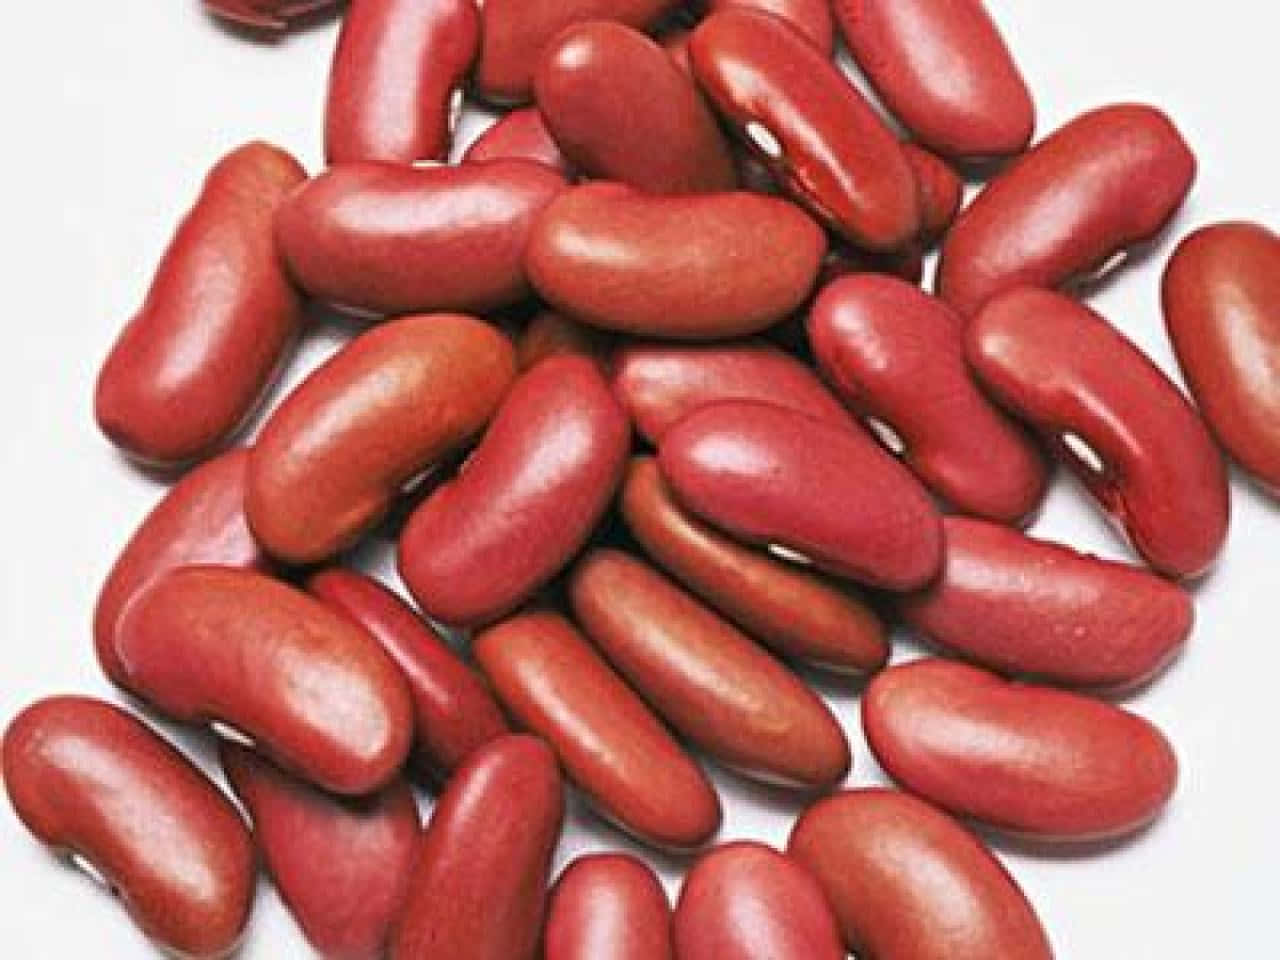 Explore the Different Flavors of Beans